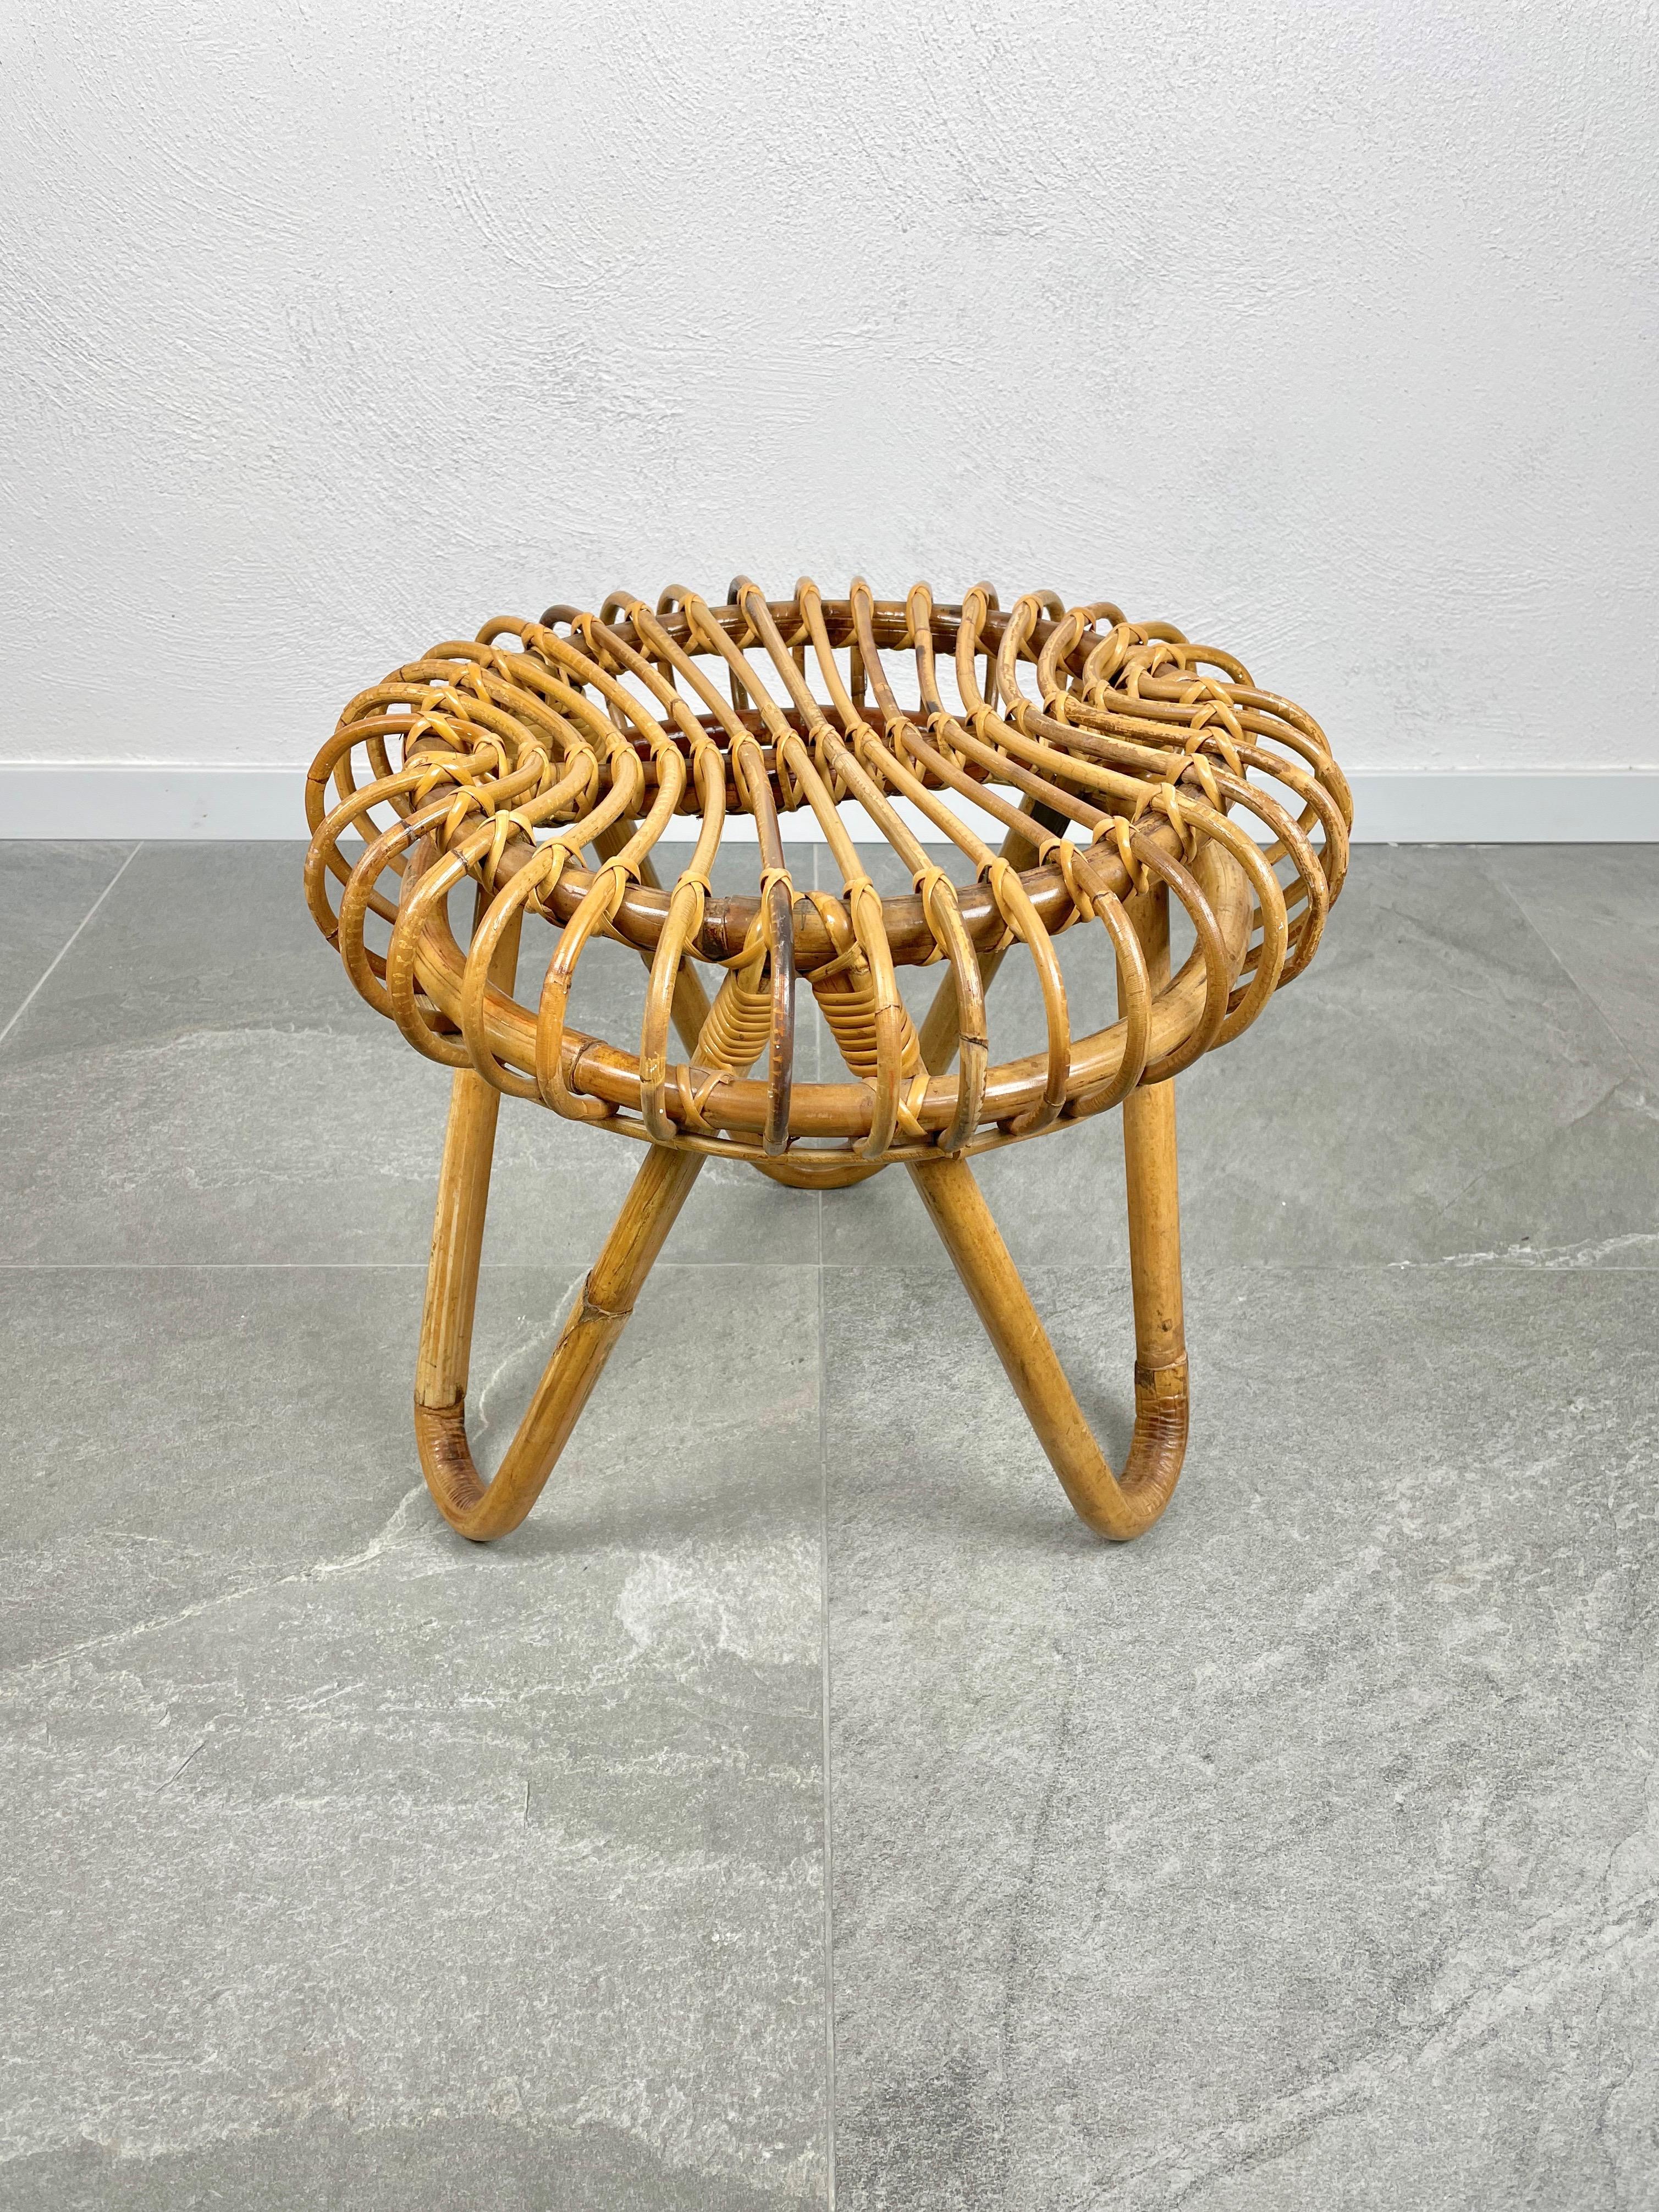 Mid-Century Modern stool in rattan and bamboo made in Italy in the 1960s.